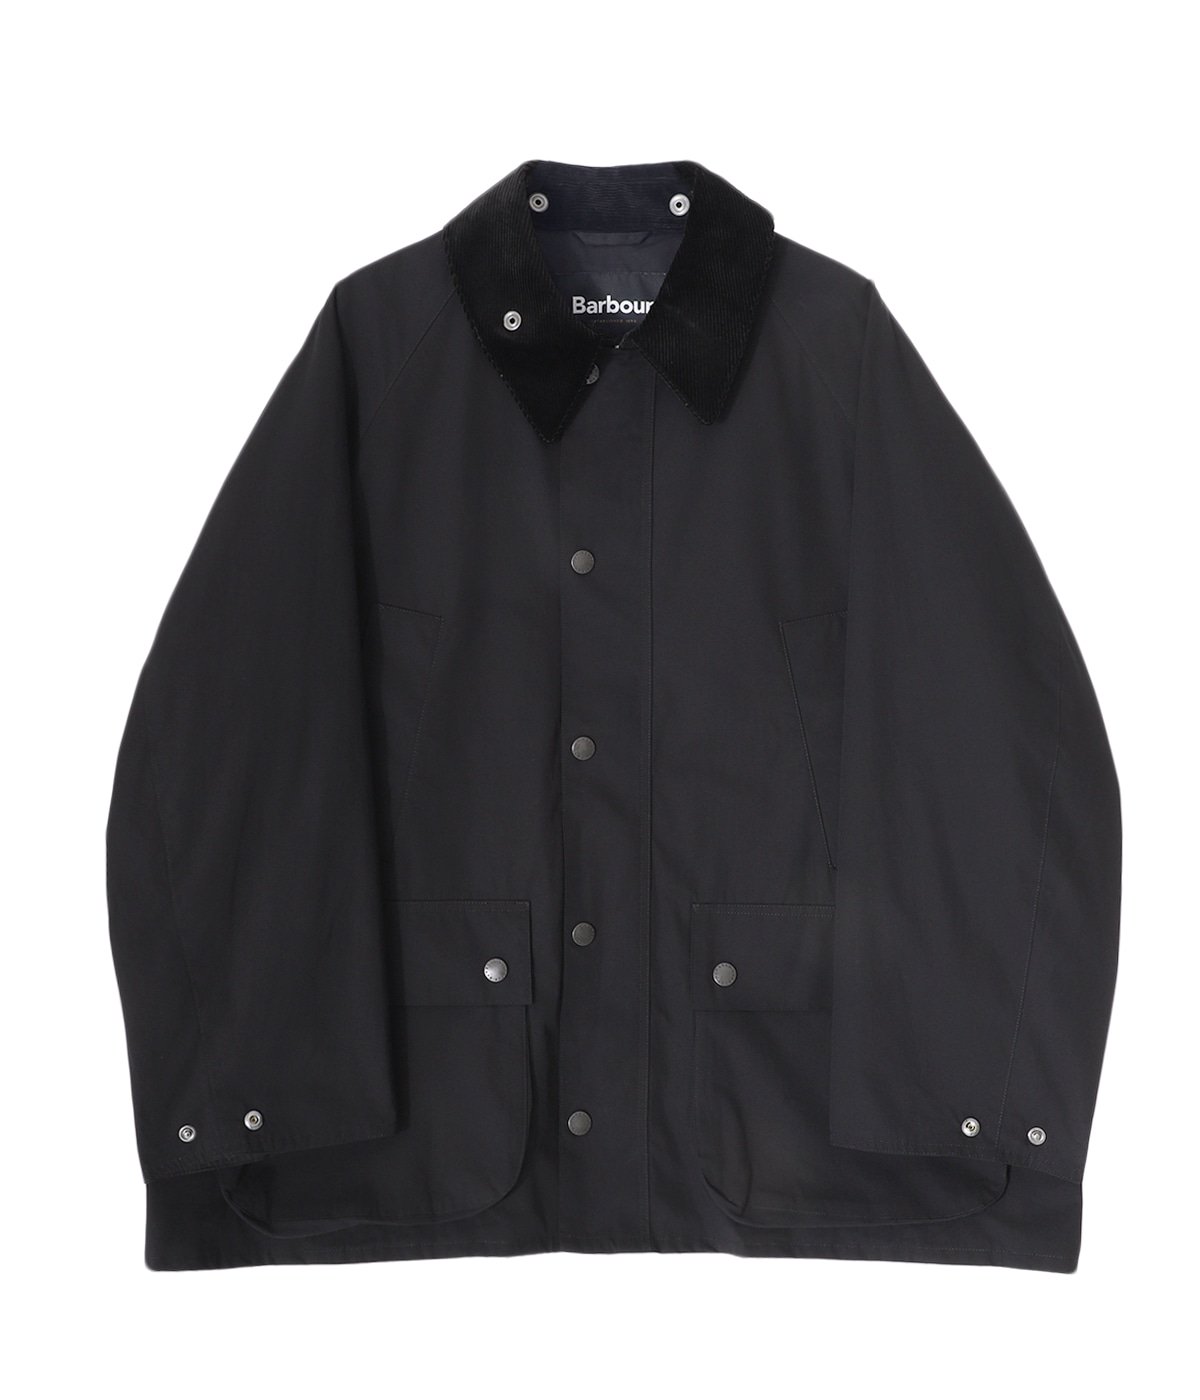 Barbour x SHIPS 3レイヤー ナイロン BEDAILE(ビデイル) - ナイロン ...